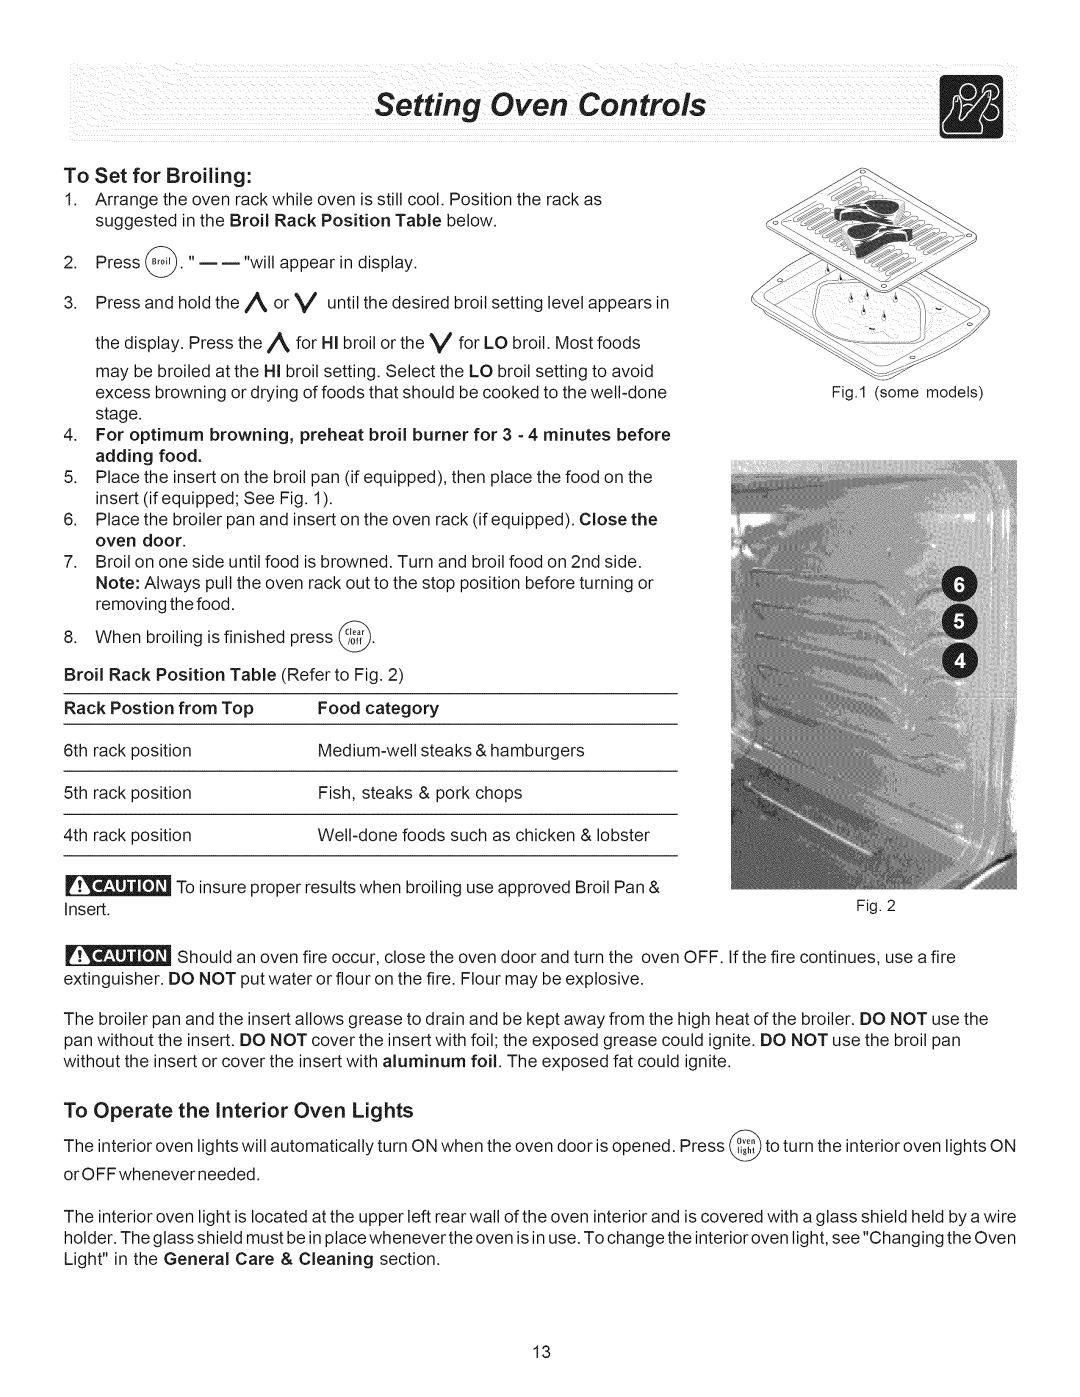 Crosley ES300 manual To Set for Broiling, To Operate the interior Oven Lights 